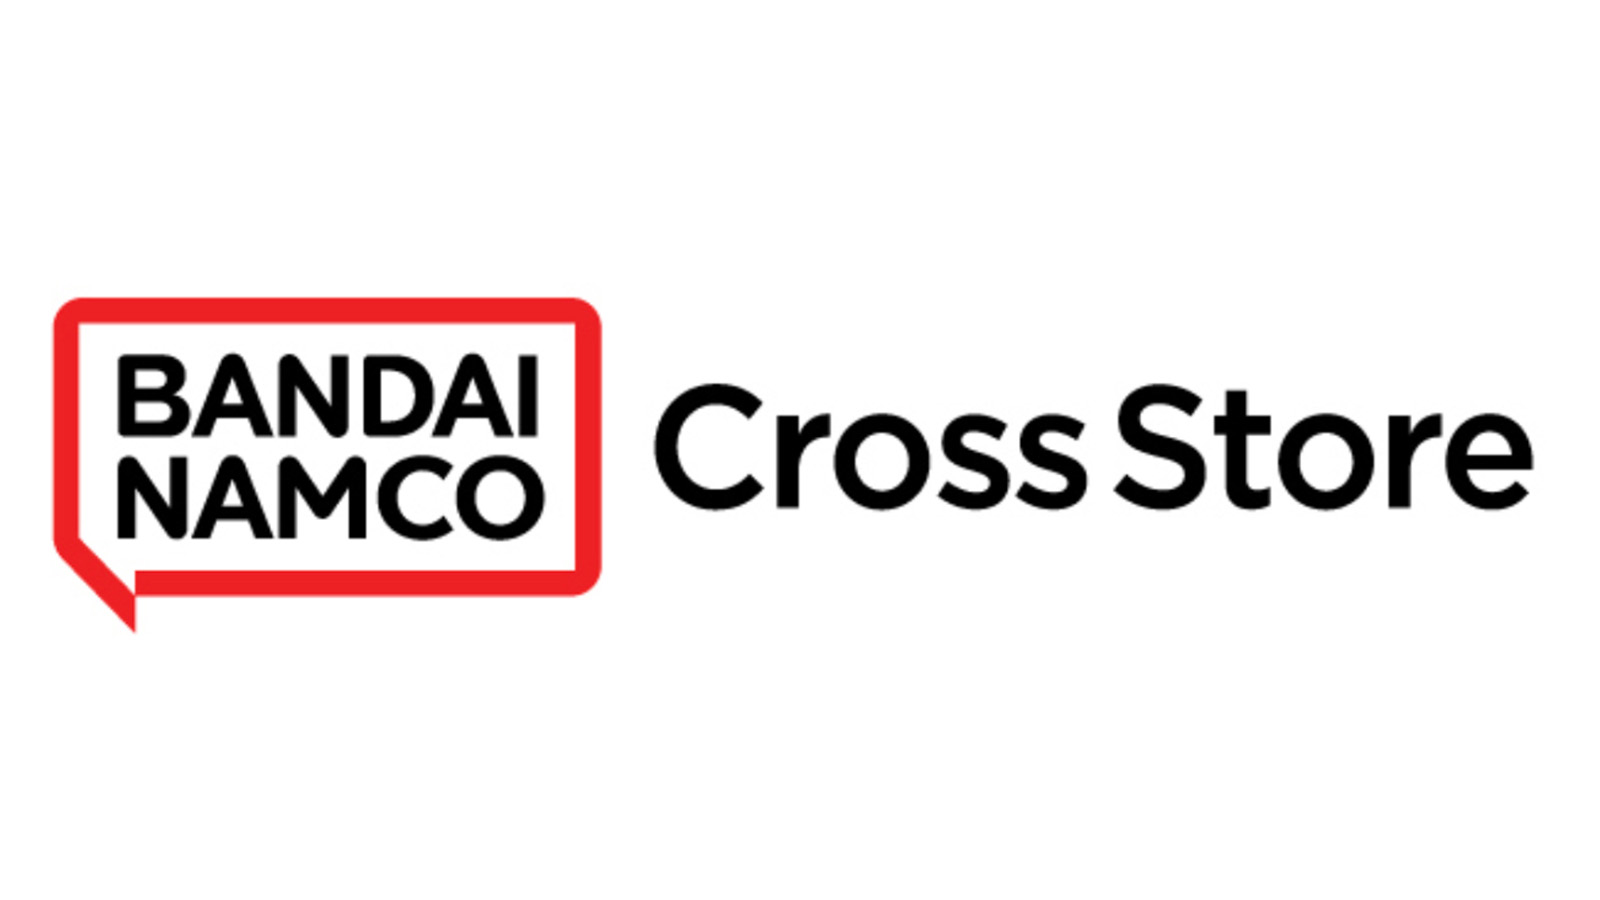 Bandai Namco’s London Cross Store Opens August 18th